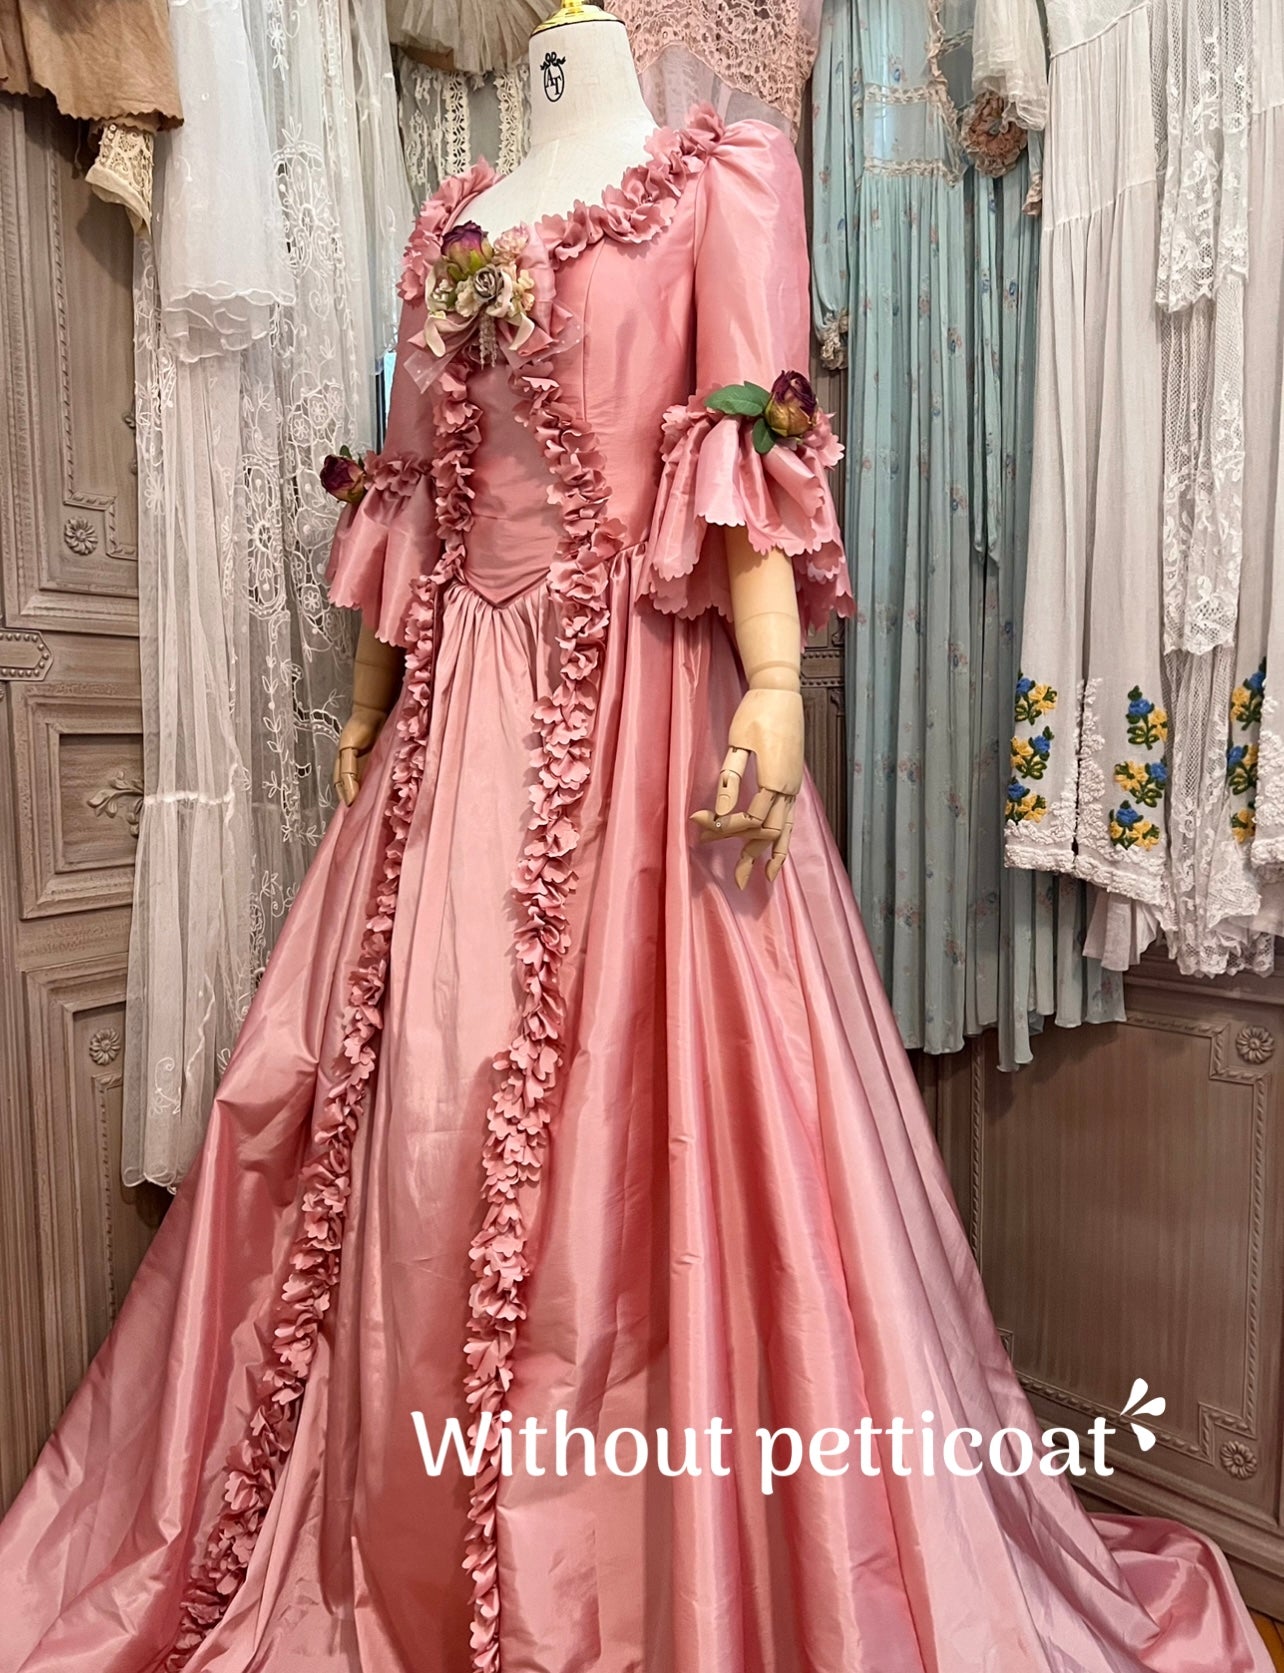 Marie Antoinette Retro Dusty Pink Lace Stain Gothic Corset Evening Gown  Urban Fantasy Ihot Vintage Tea Dress From Daye01, $171.79